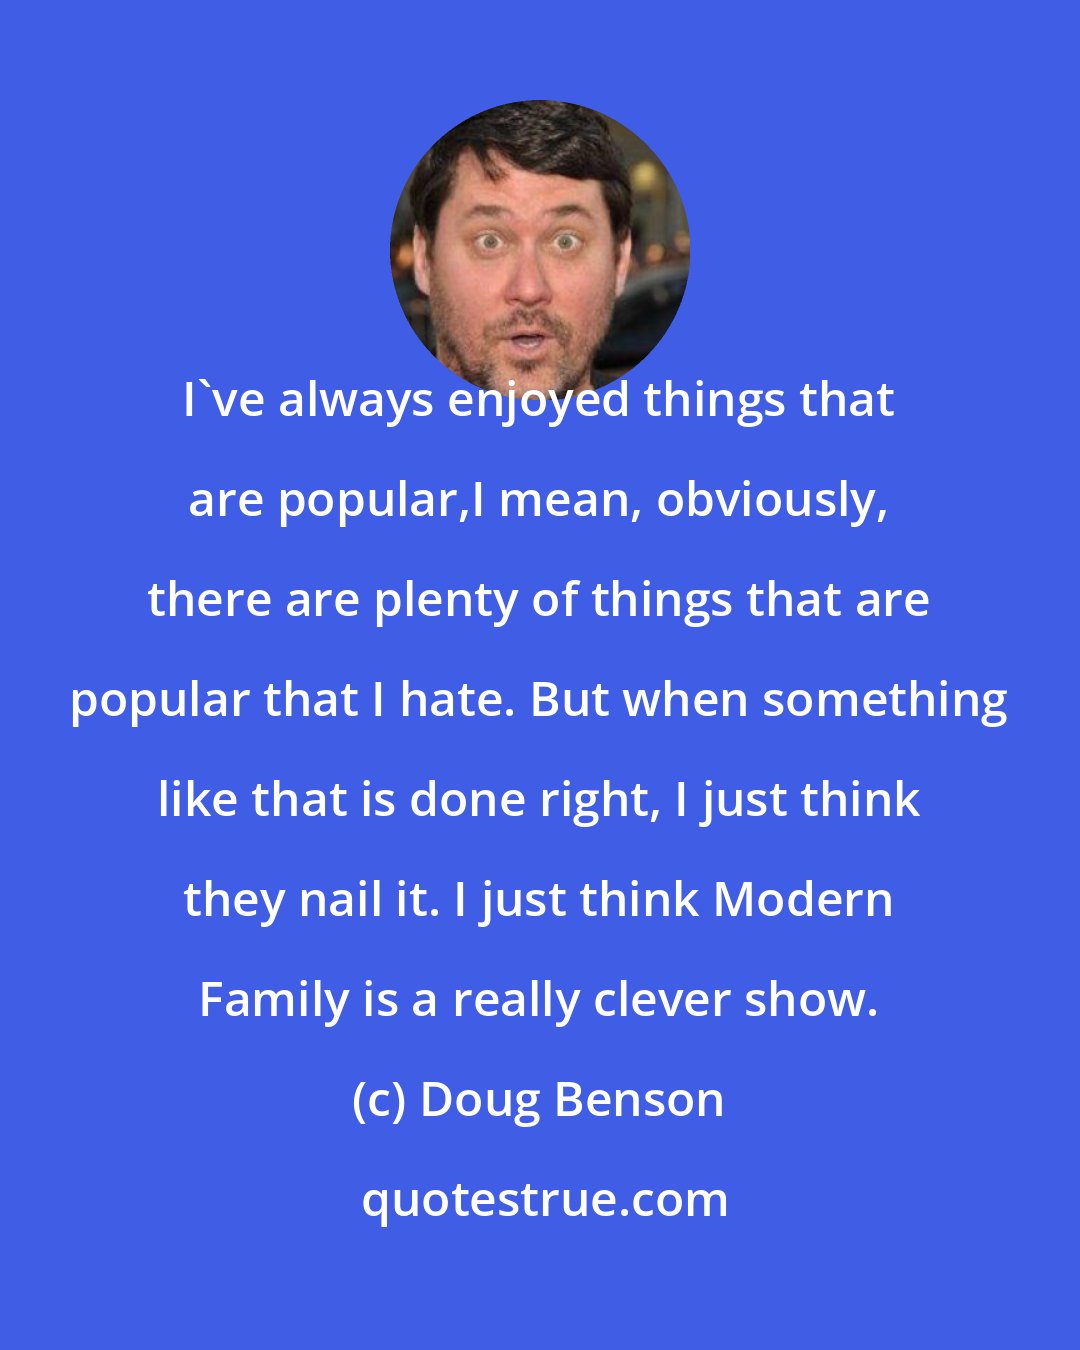 Doug Benson: I've always enjoyed things that are popular,I mean, obviously, there are plenty of things that are popular that I hate. But when something like that is done right, I just think they nail it. I just think Modern Family is a really clever show.